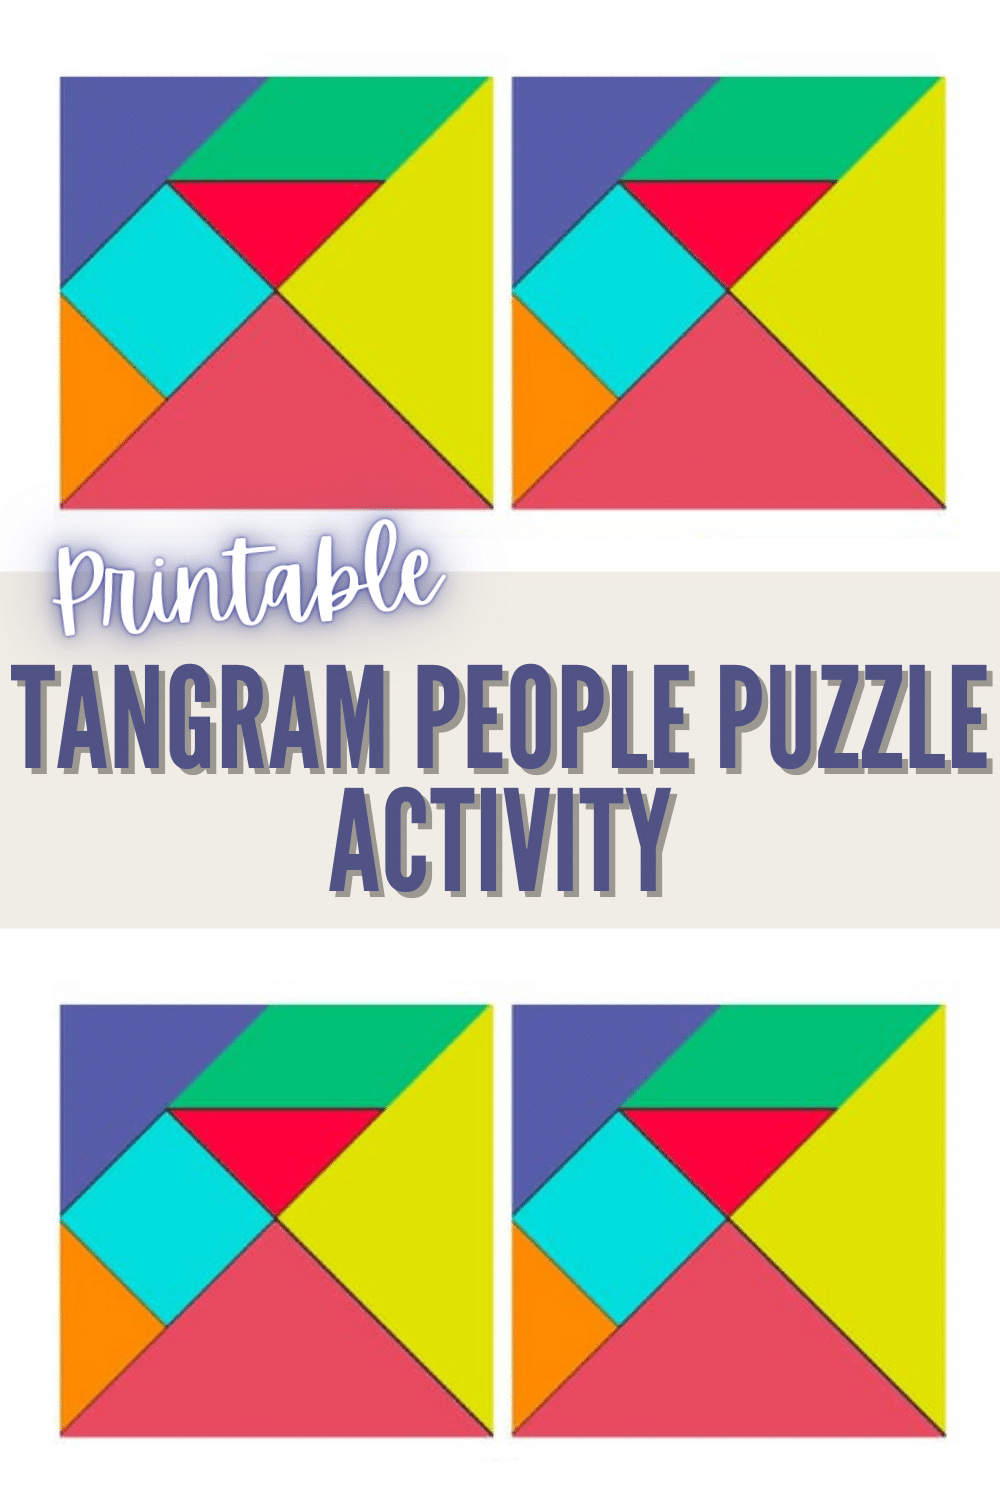 If you love puzzles these printable tangram people will be perfect! These fun people tangram puzzles are simple to print off and complete at home. #tangrams #puzzles #printables via @wondermomwannab